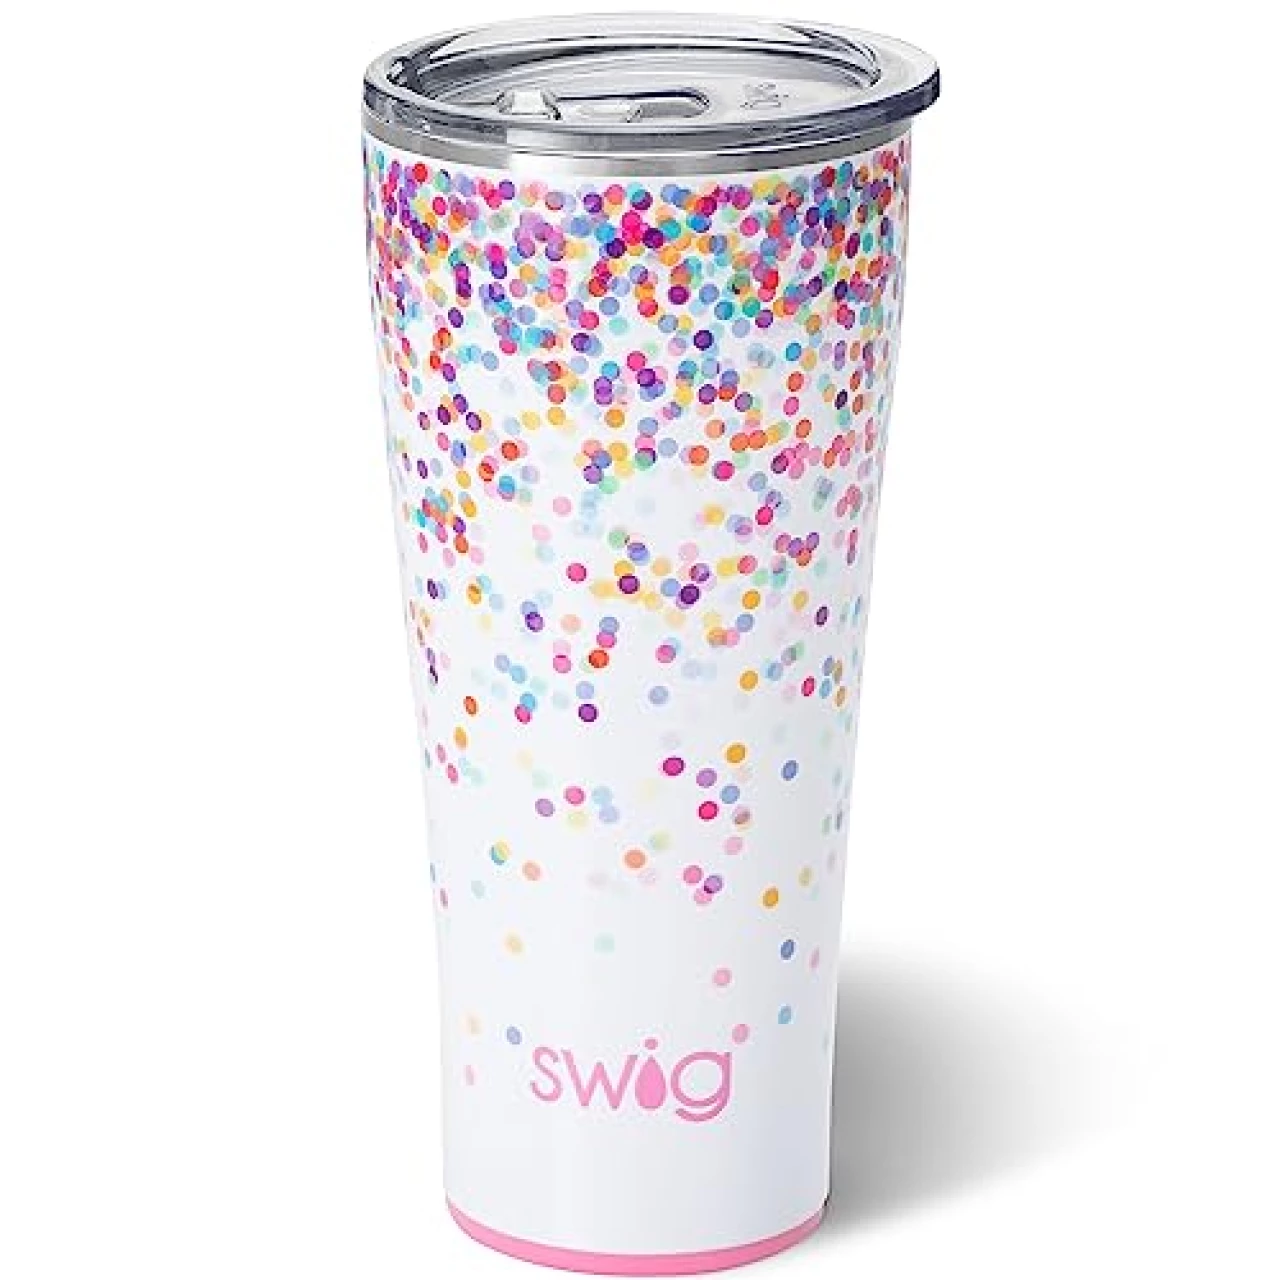 Swig Life XL 32oz Tumbler, Insulated Coffee Tumbler with Lid, Cup Holder Friendly, Dishwasher Safe, Stainless Steel, Extra Large Travel Mugs Insulated for Hot and Cold Drinks (Confetti)